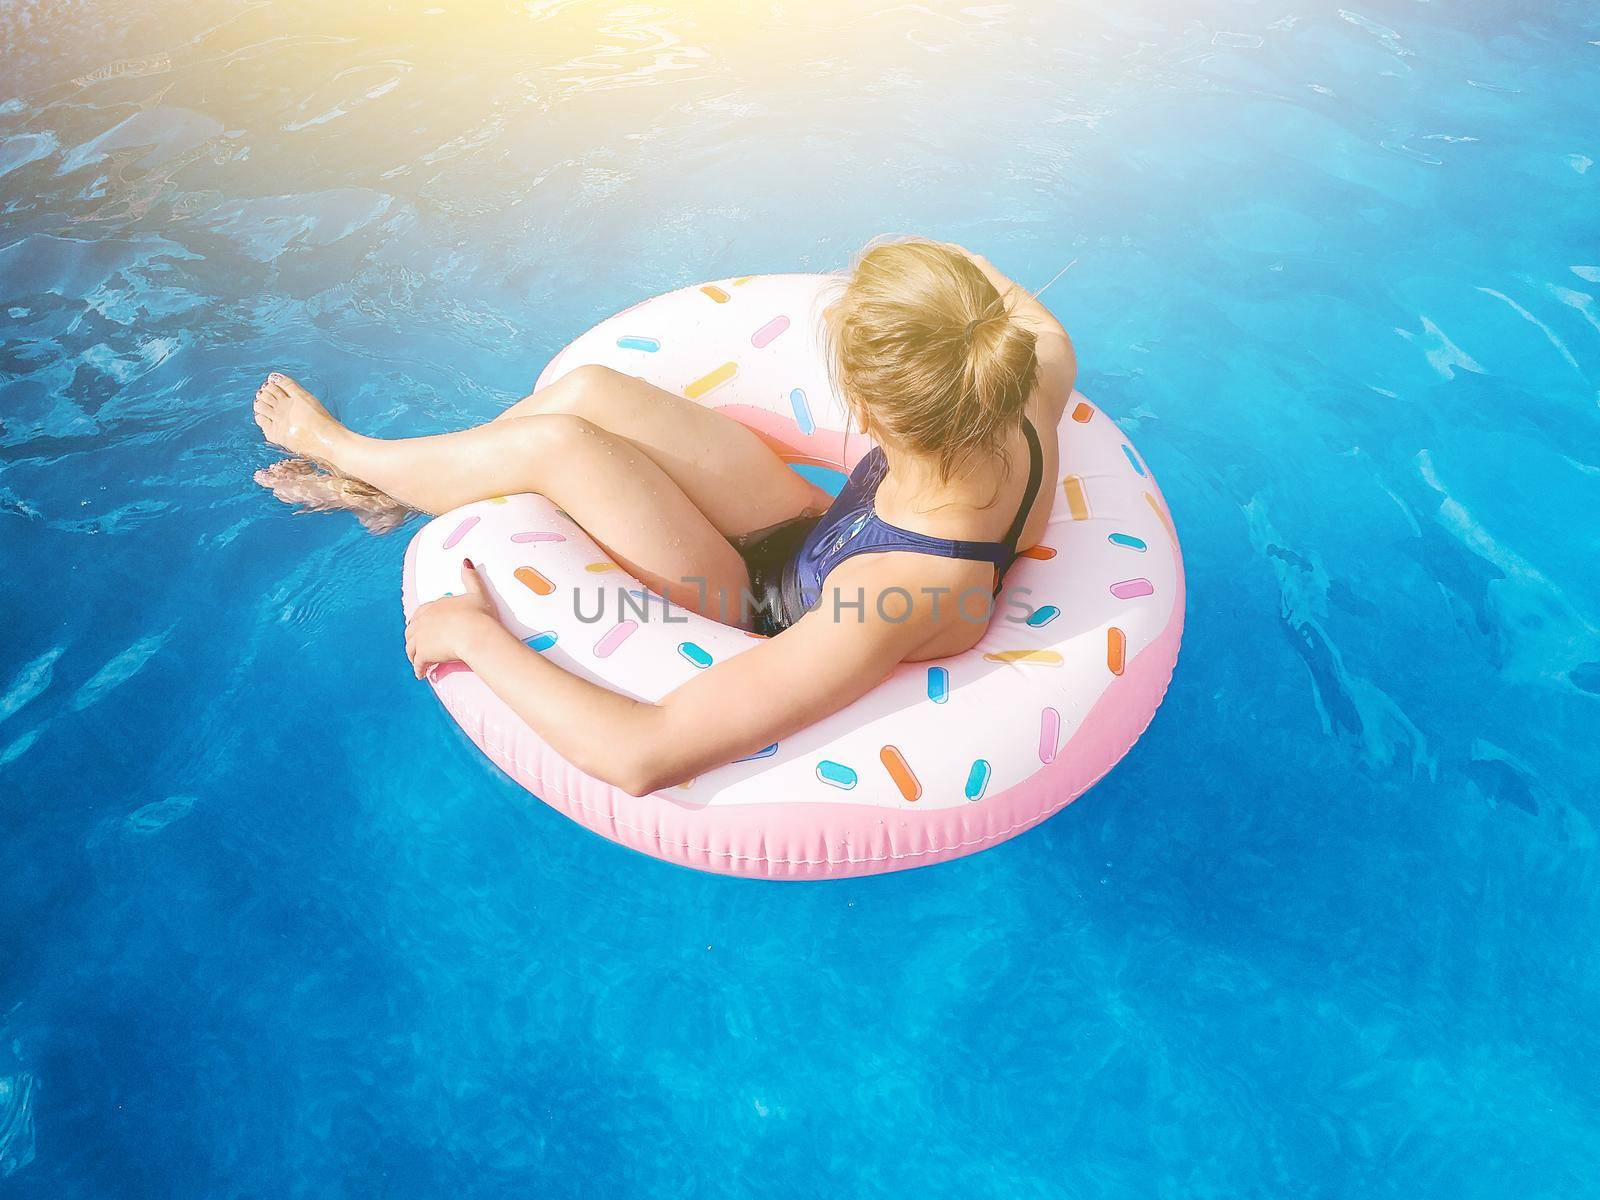 Summer warm vacation. The girl sits on a rubber ring in the form of a donut in a blue pool. Time to relax on an air mattress. Having fun in the water for a family vacation. Sea resort.